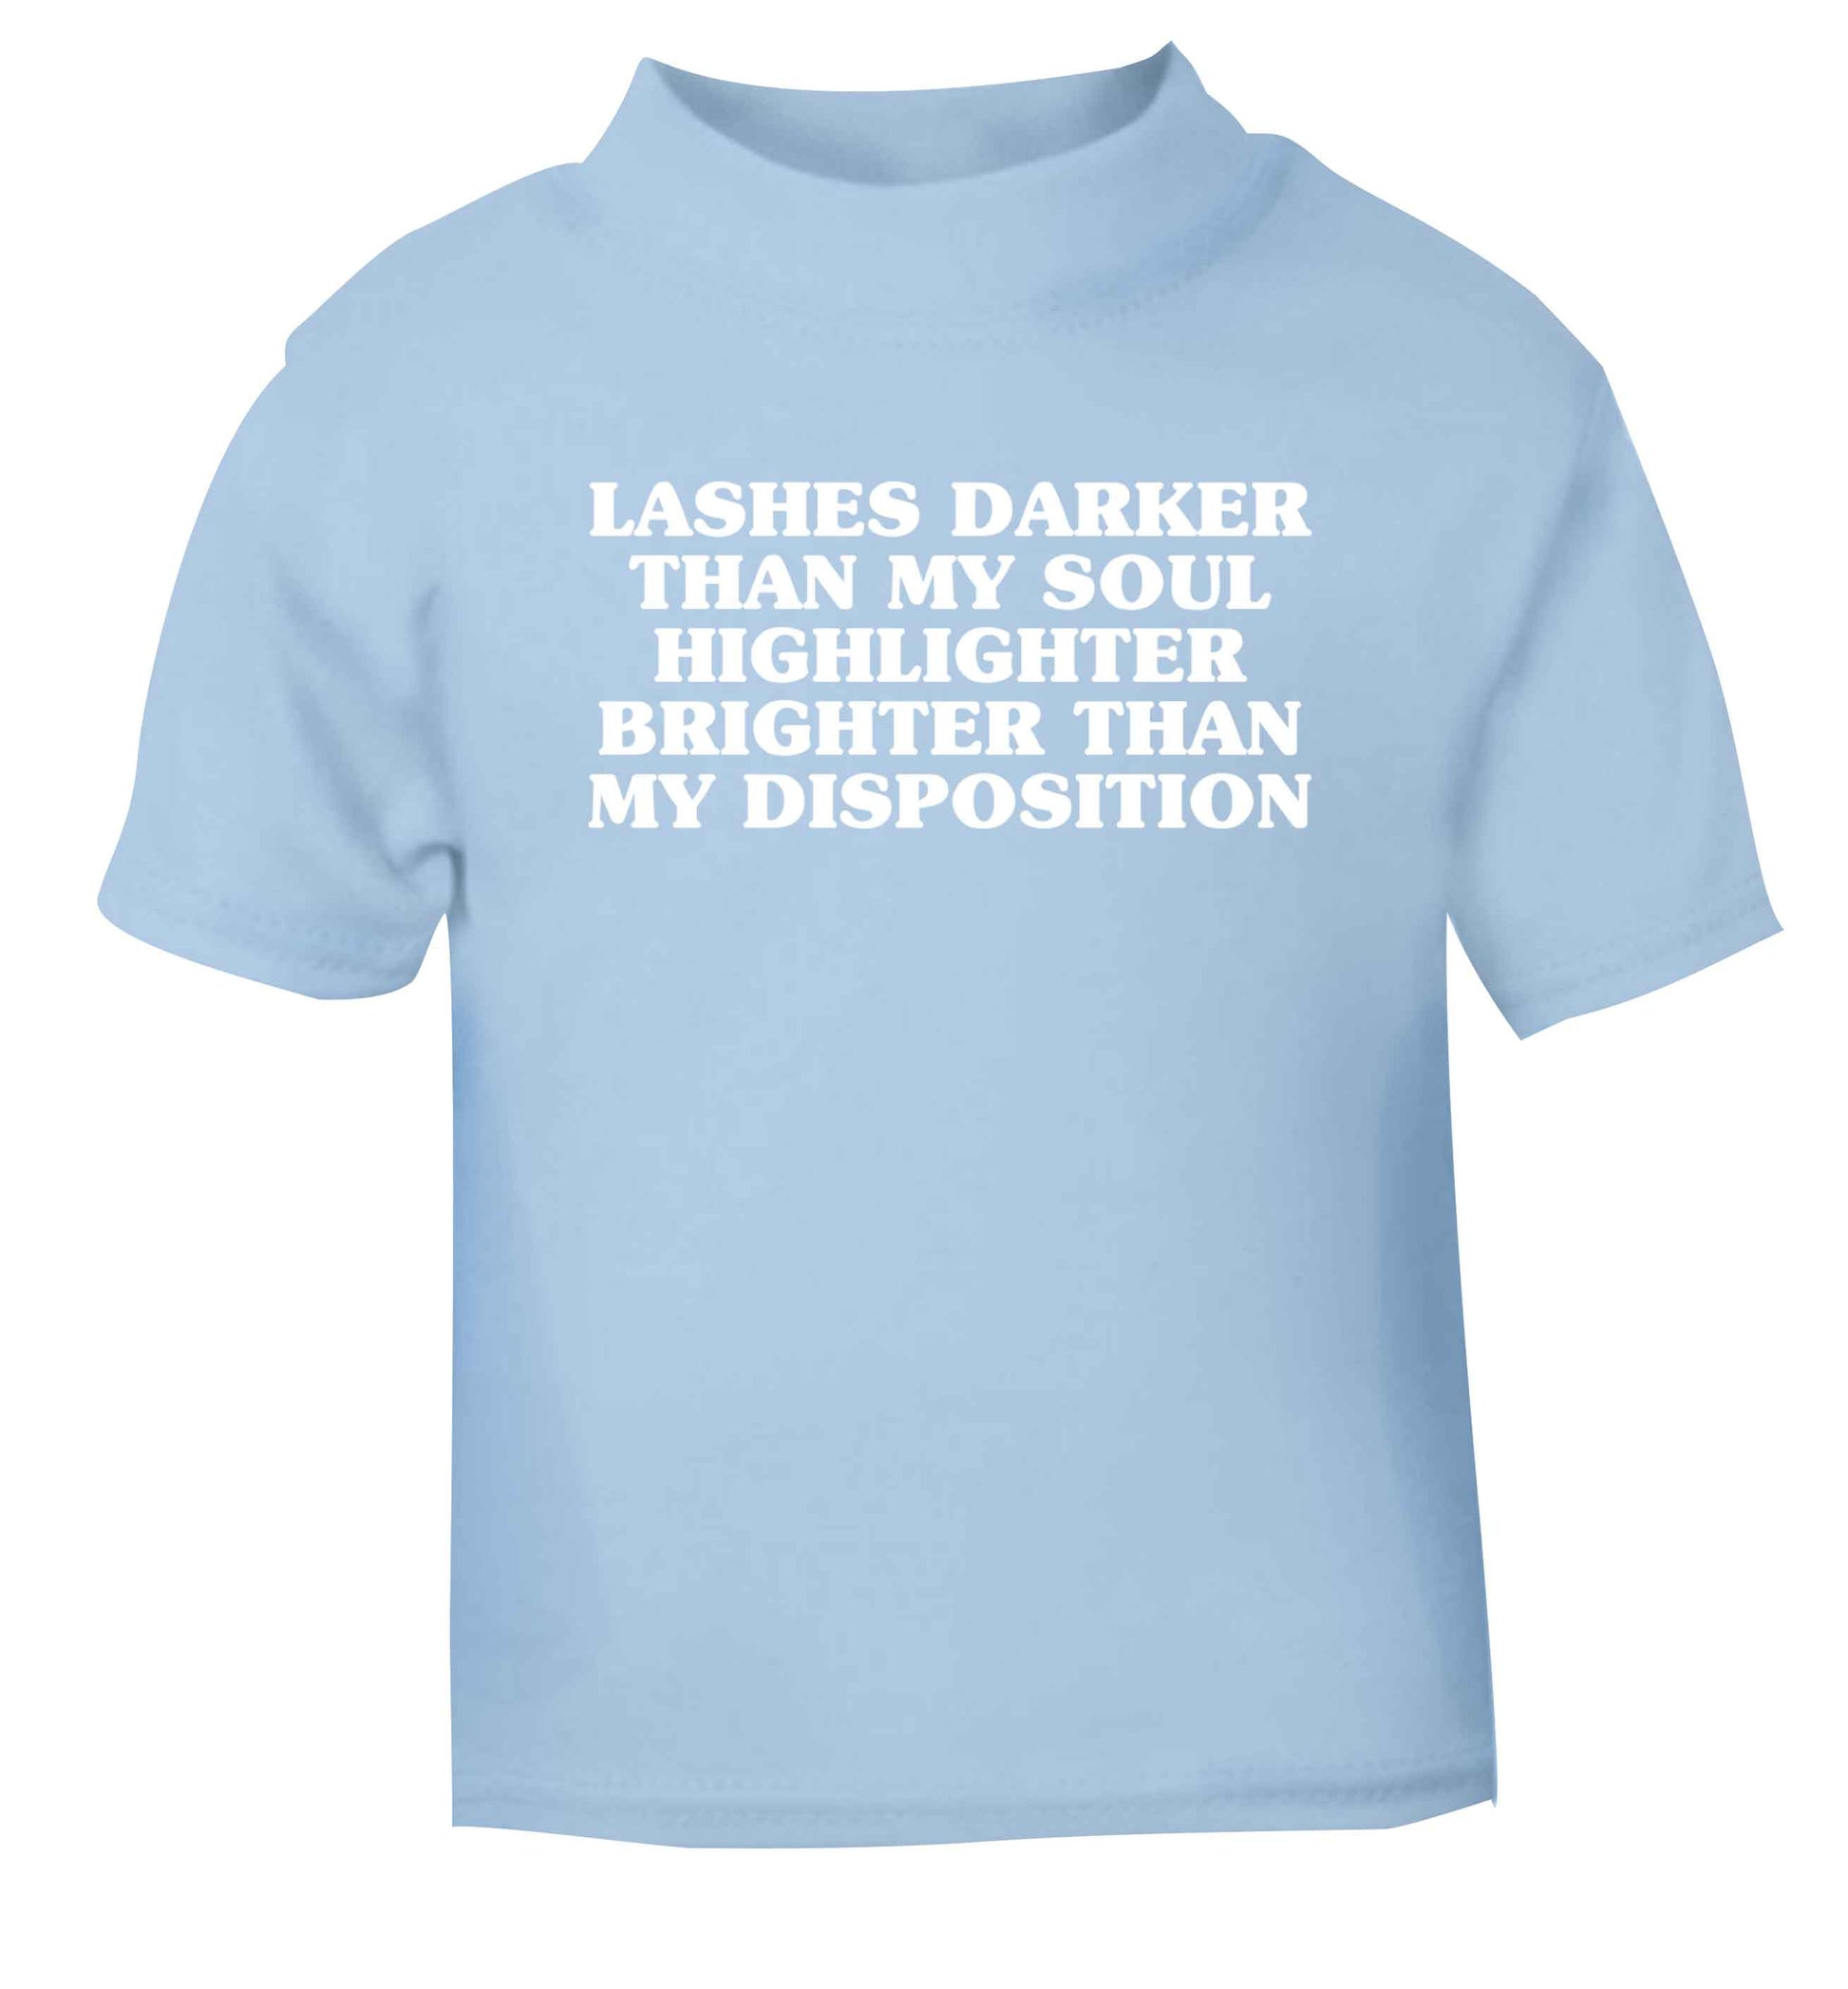 Lashes darker than my soul, highlighter brighter than my disposition light blue Baby Toddler Tshirt 2 Years